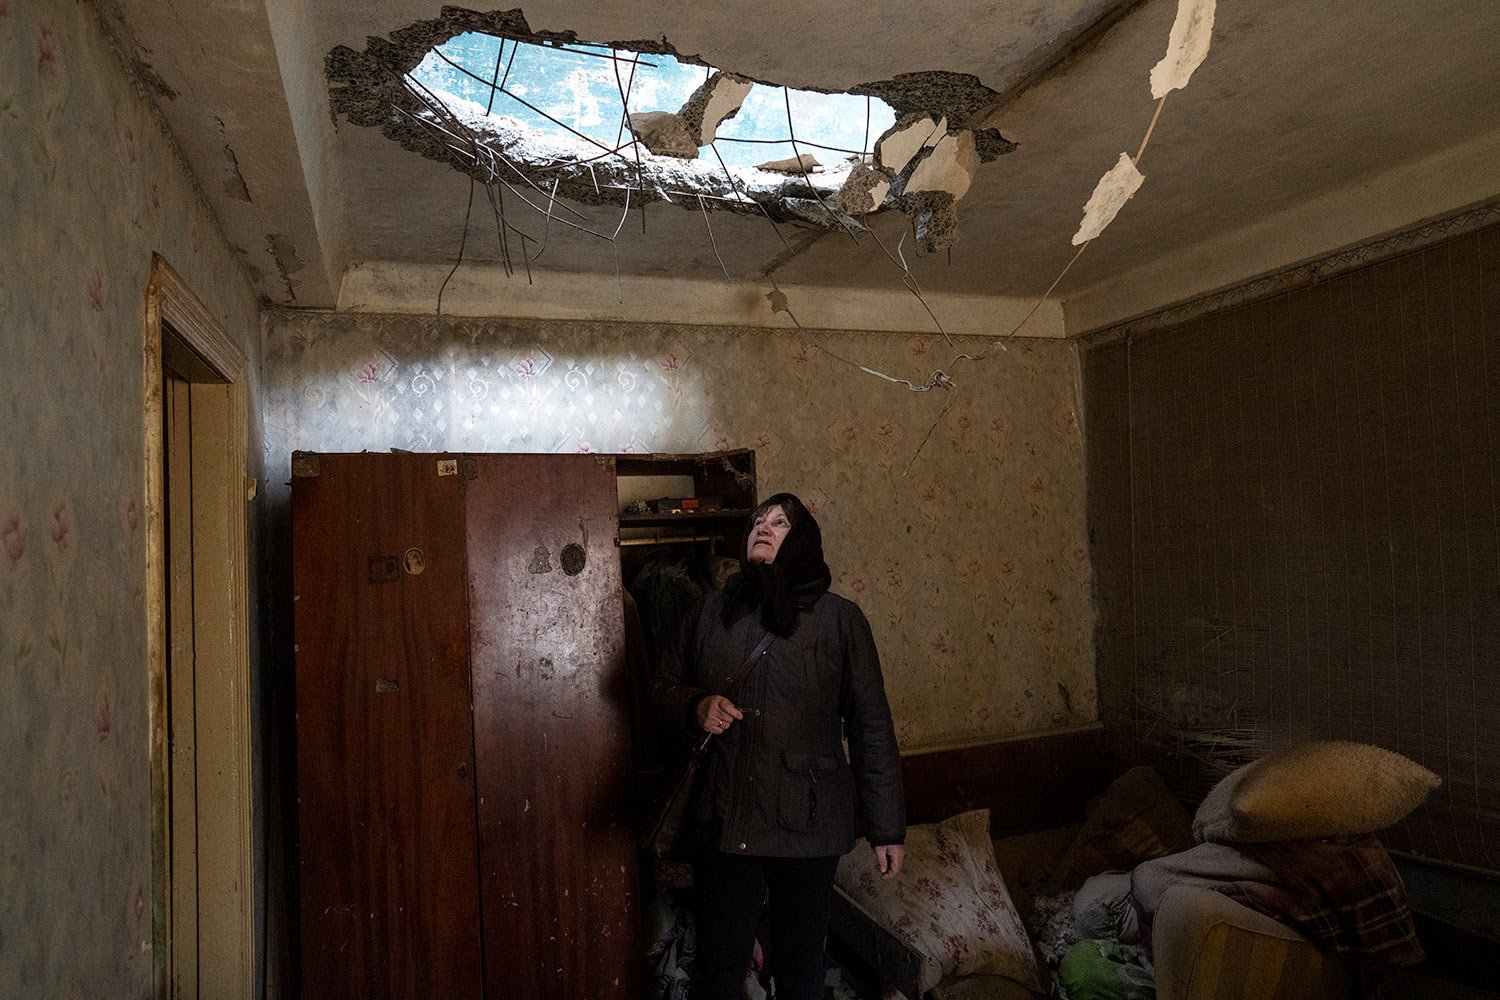  Halyna Falko looks at the destruction caused after a Russian attack inside her house near Brovary, on the outskirts of Kyiv, Ukraine, Monday, March 28, 2022. (AP Photo/Rodrigo Abd) 